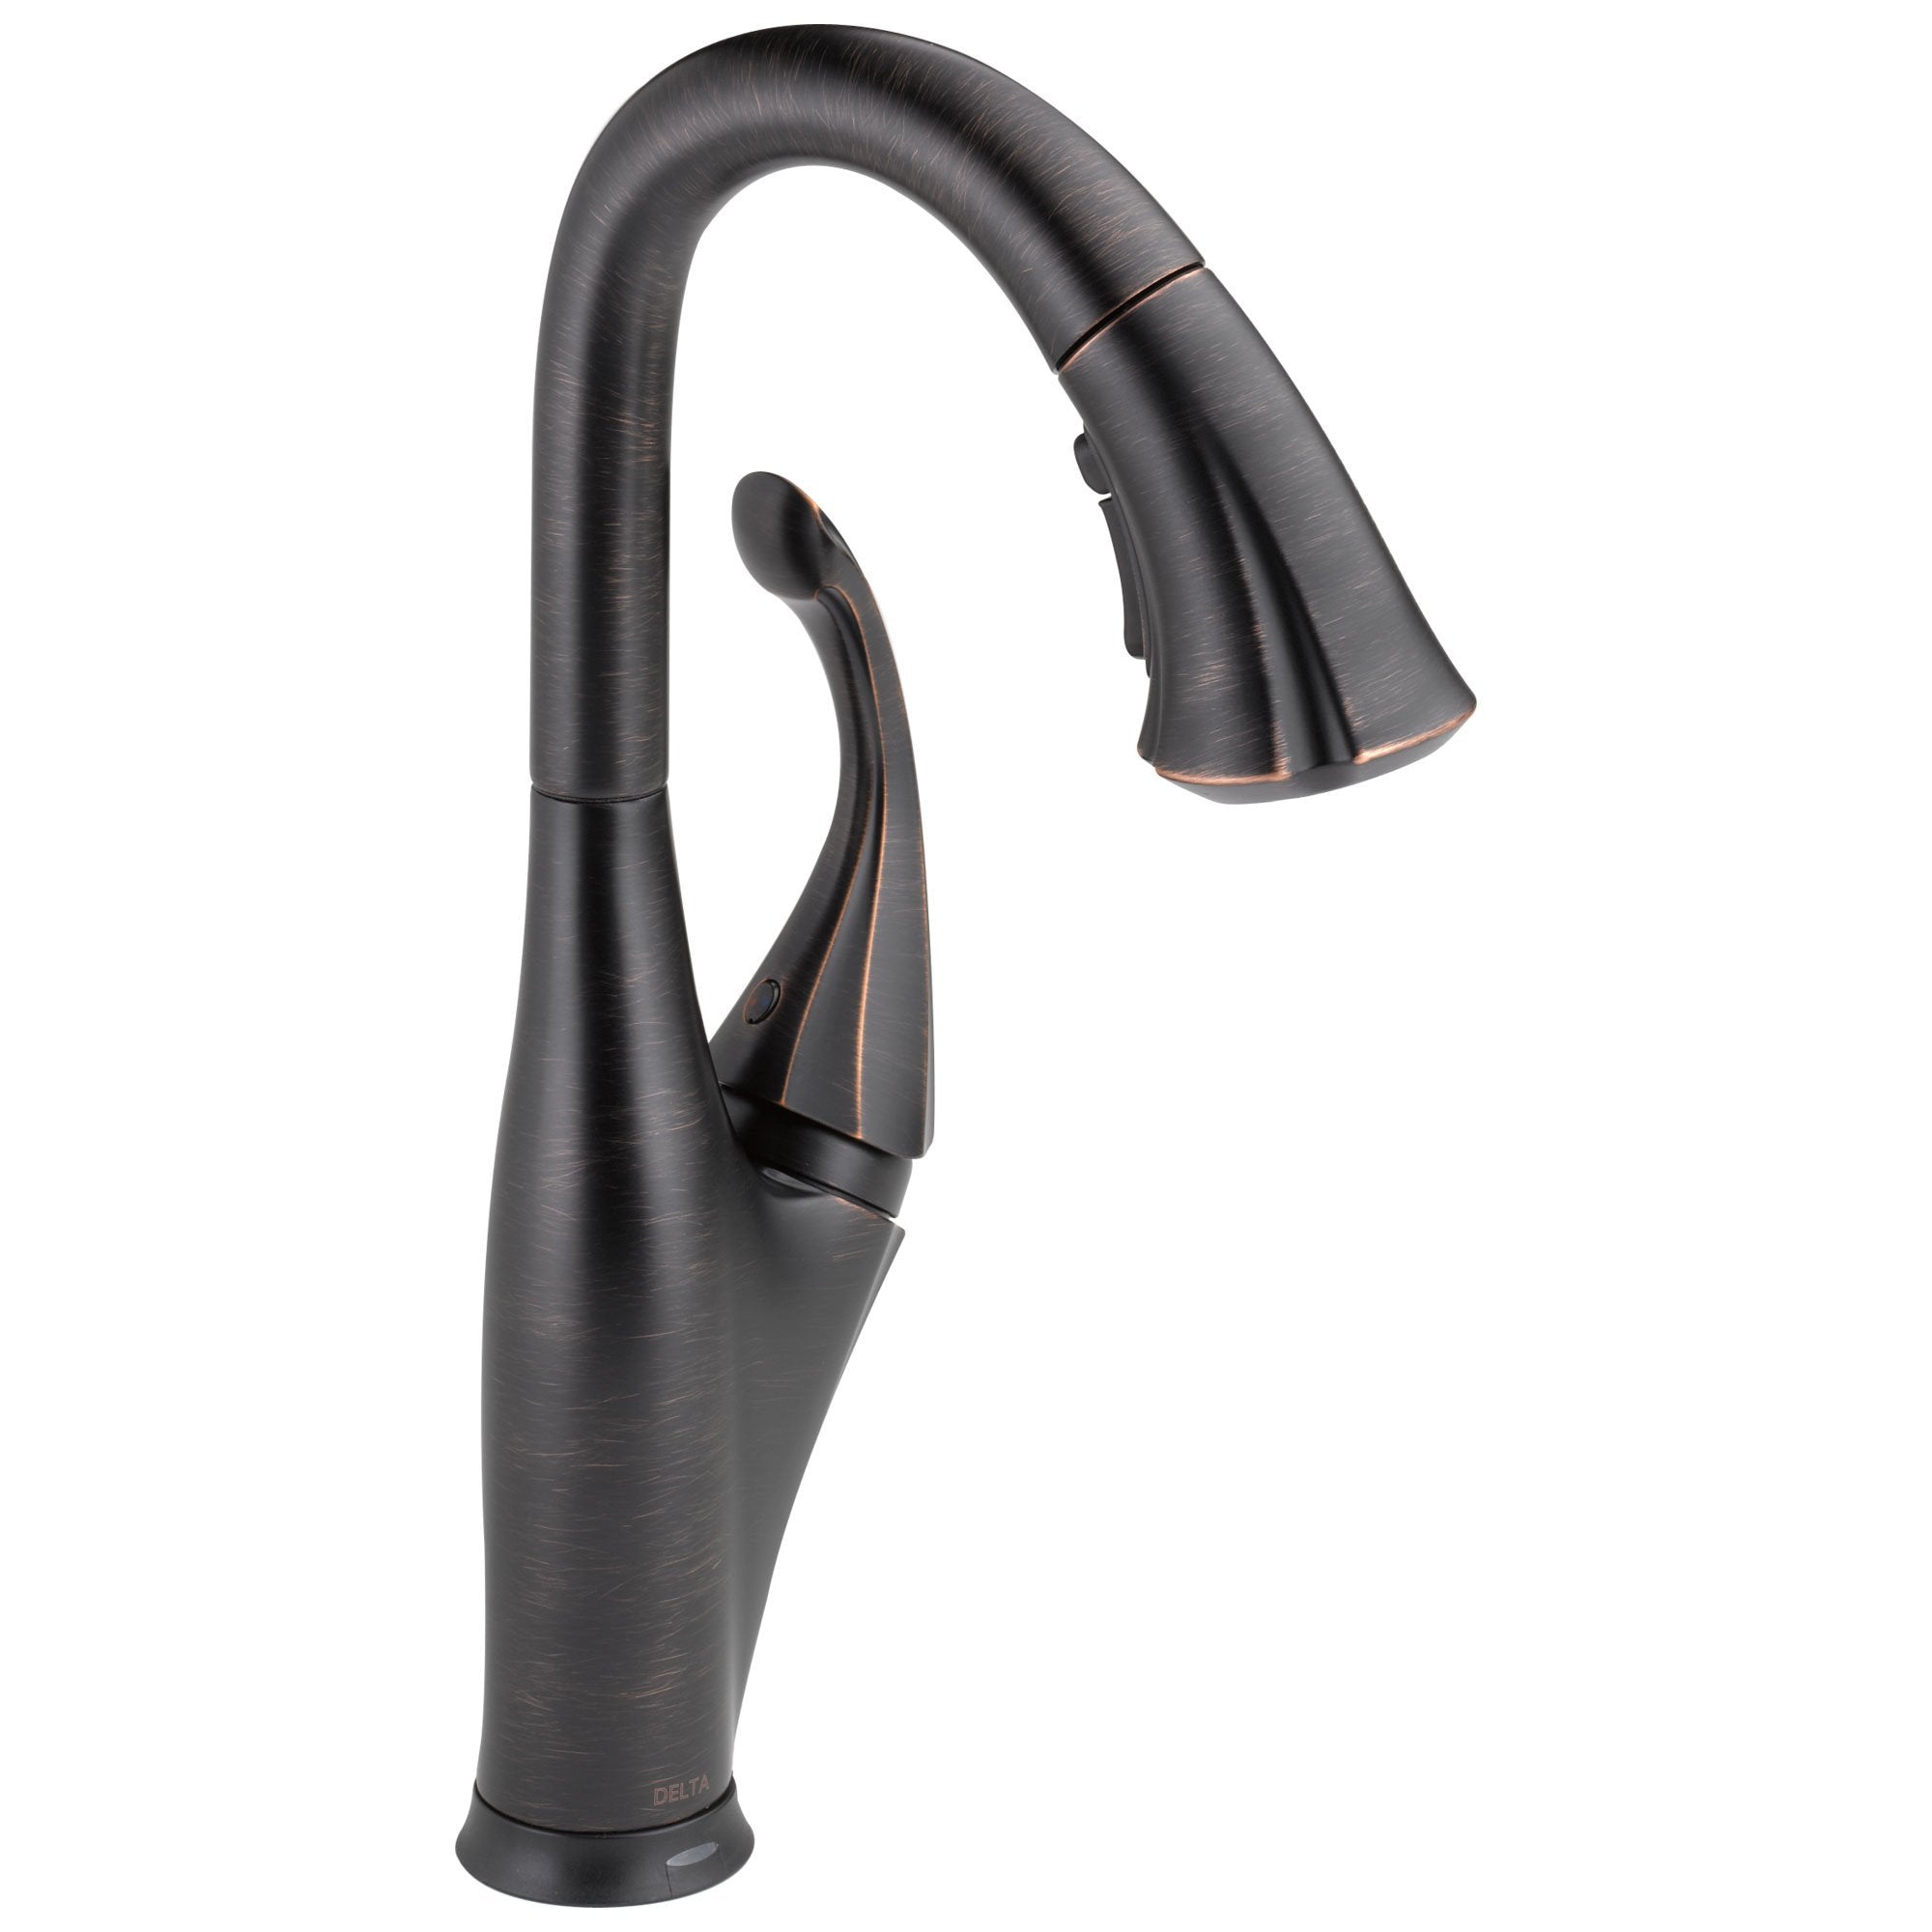 Delta Addison Collection Venetian Bronze Finish Single Handle Pull-Down Bar / Prep Sink Faucet with Touch2O Technology 522002